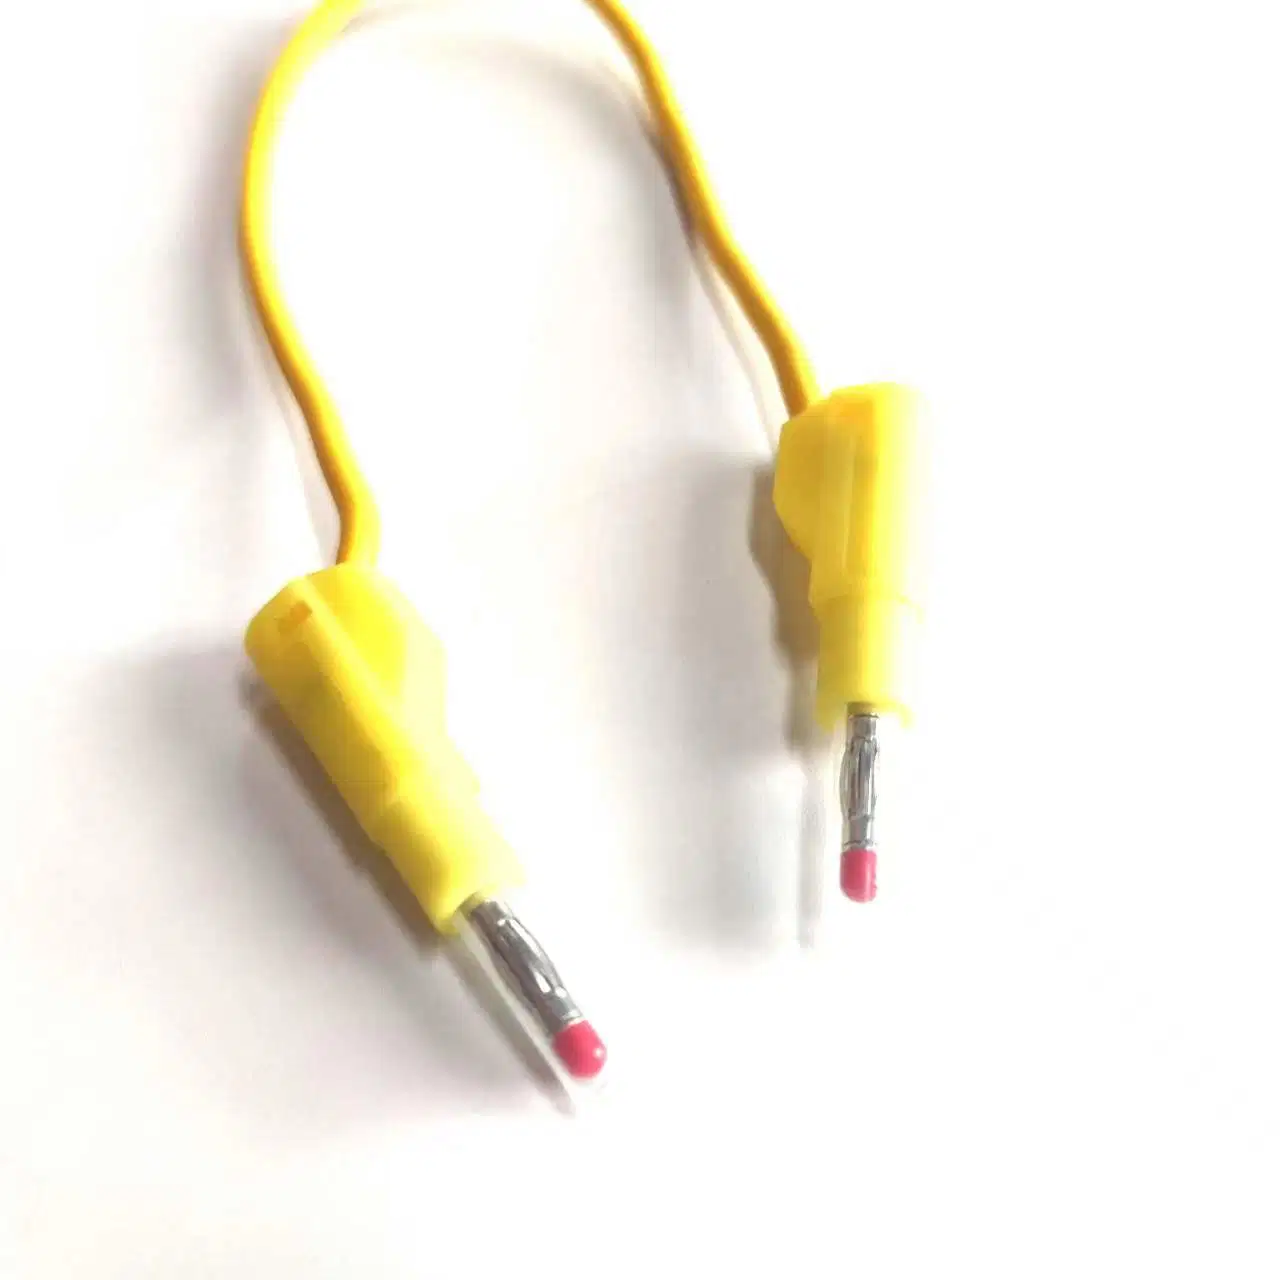 4mm Banana Plug Speaker Cable Banana to Banana Male to Male 4mm Test Leads with Wire